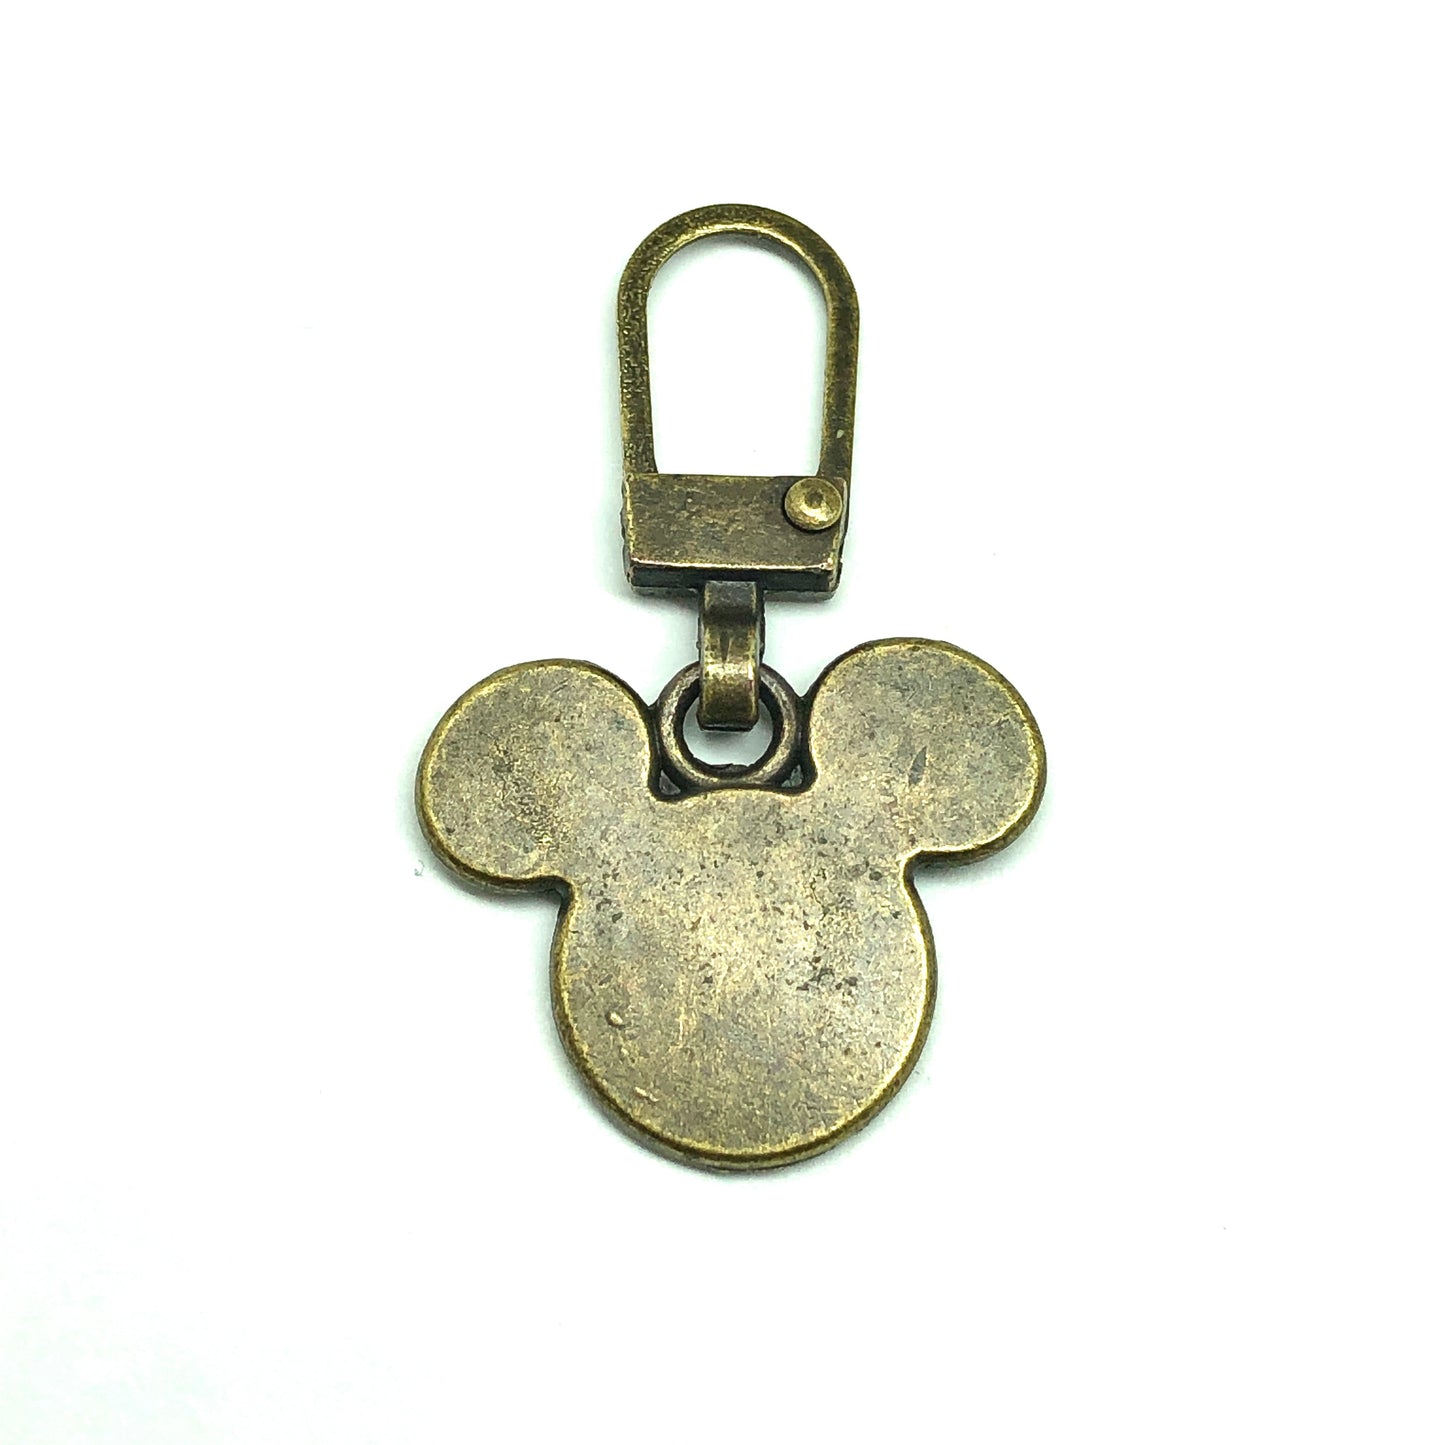 Mickey Mouse Head Charm -Zipper Pull Repair in Rustic Bronze or Add Disney Flair to Purses, Wristlets, Backpacks & More